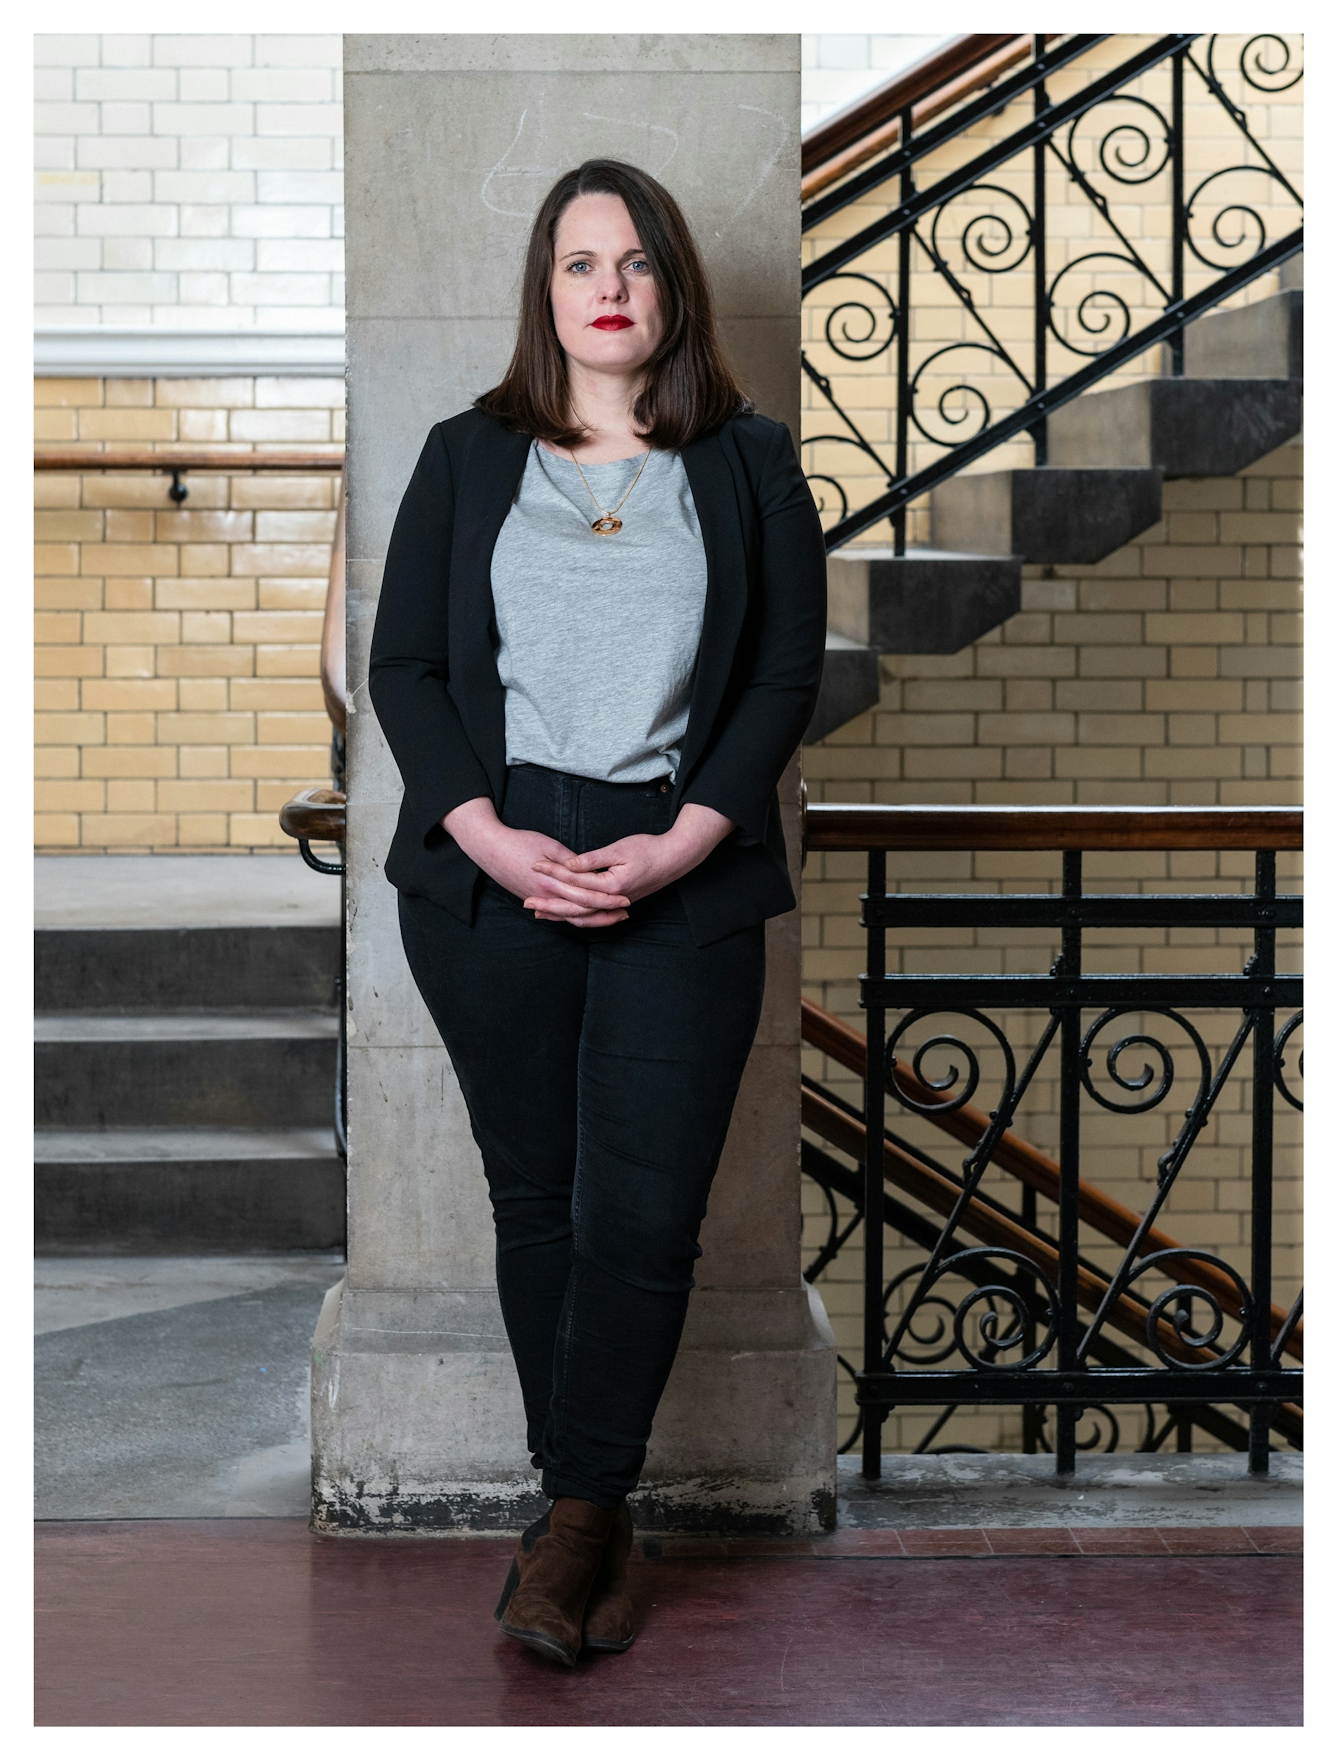 Photographic full length portrait of a woman standing looking to camera with her hands clasped in front of her black trousers. She is wearing a black long sleeved cardigan and with a grey top underneath. She is lit from the left by a soft light. Behind her are the glossy tiled walls of a Victoria period building and a large staircase with case iron balustrades made in intricate curls.